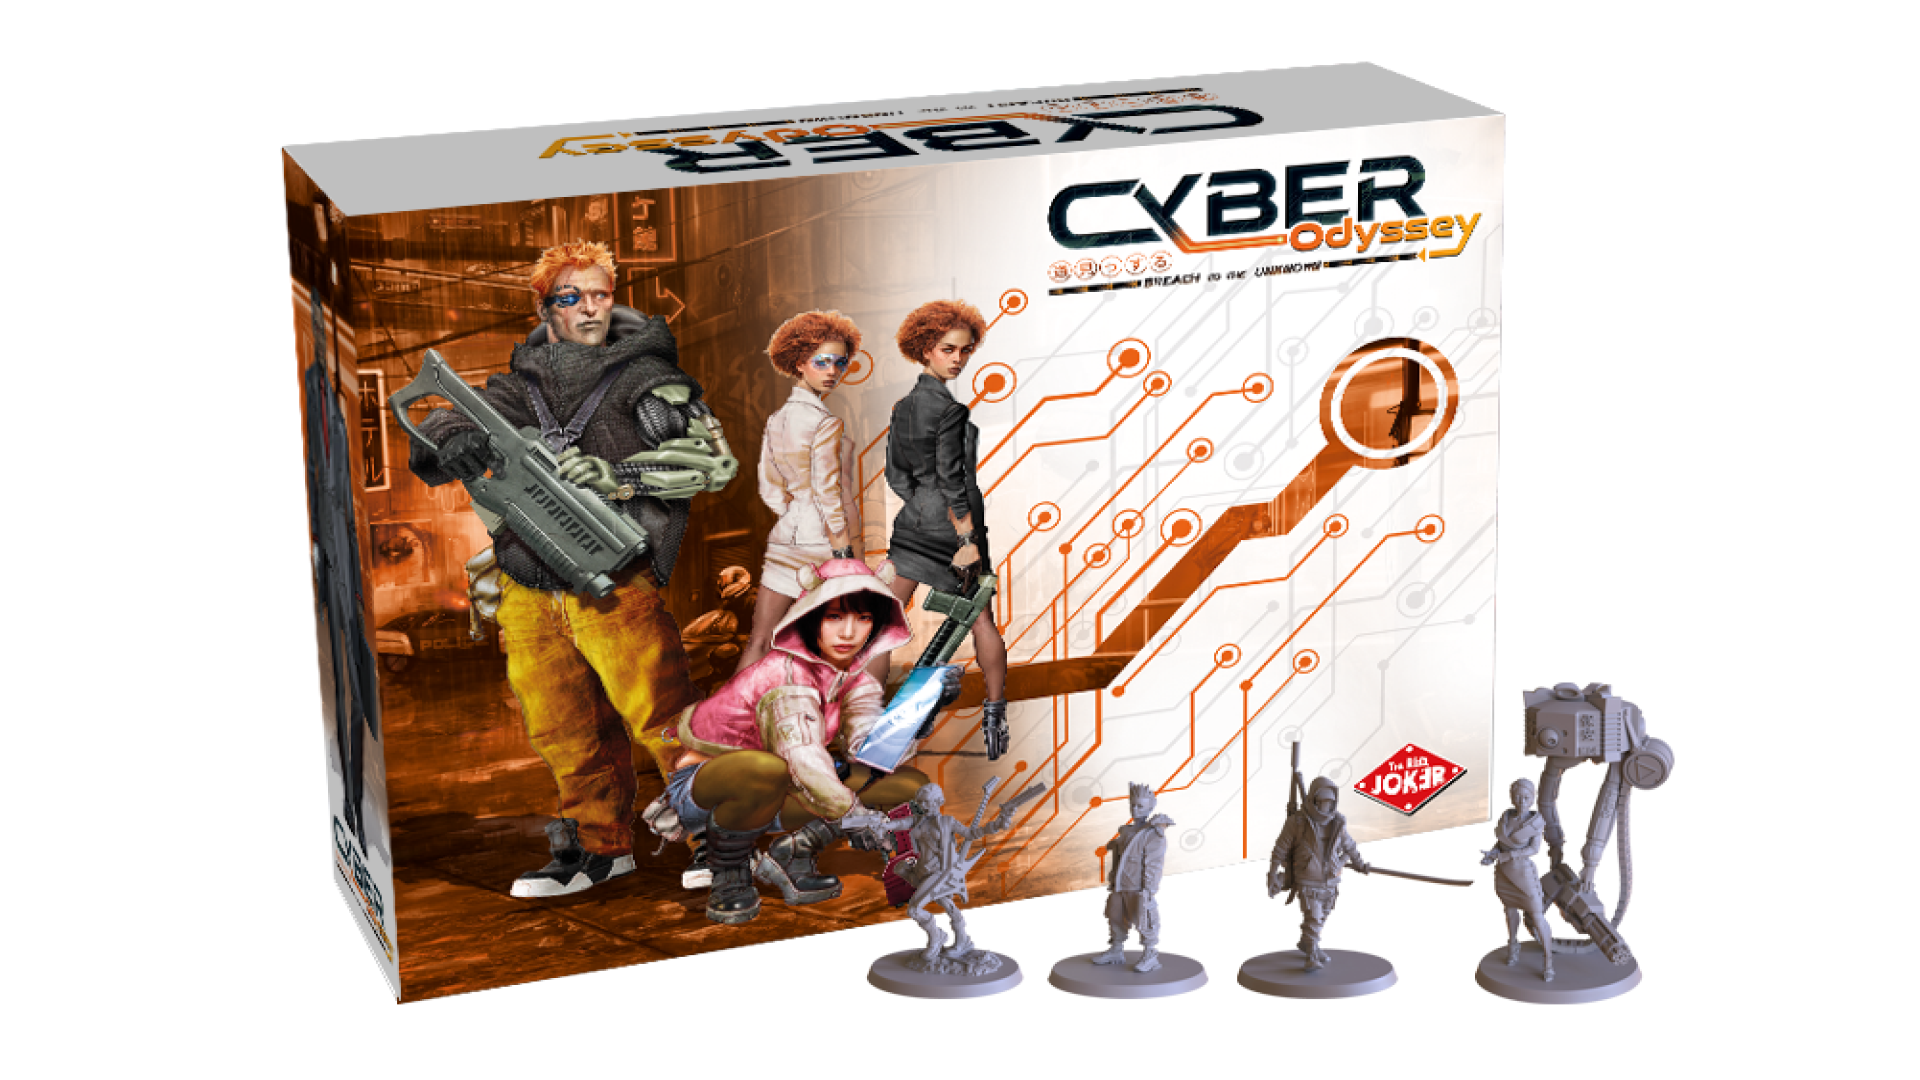 cyber odyssey box layout.png